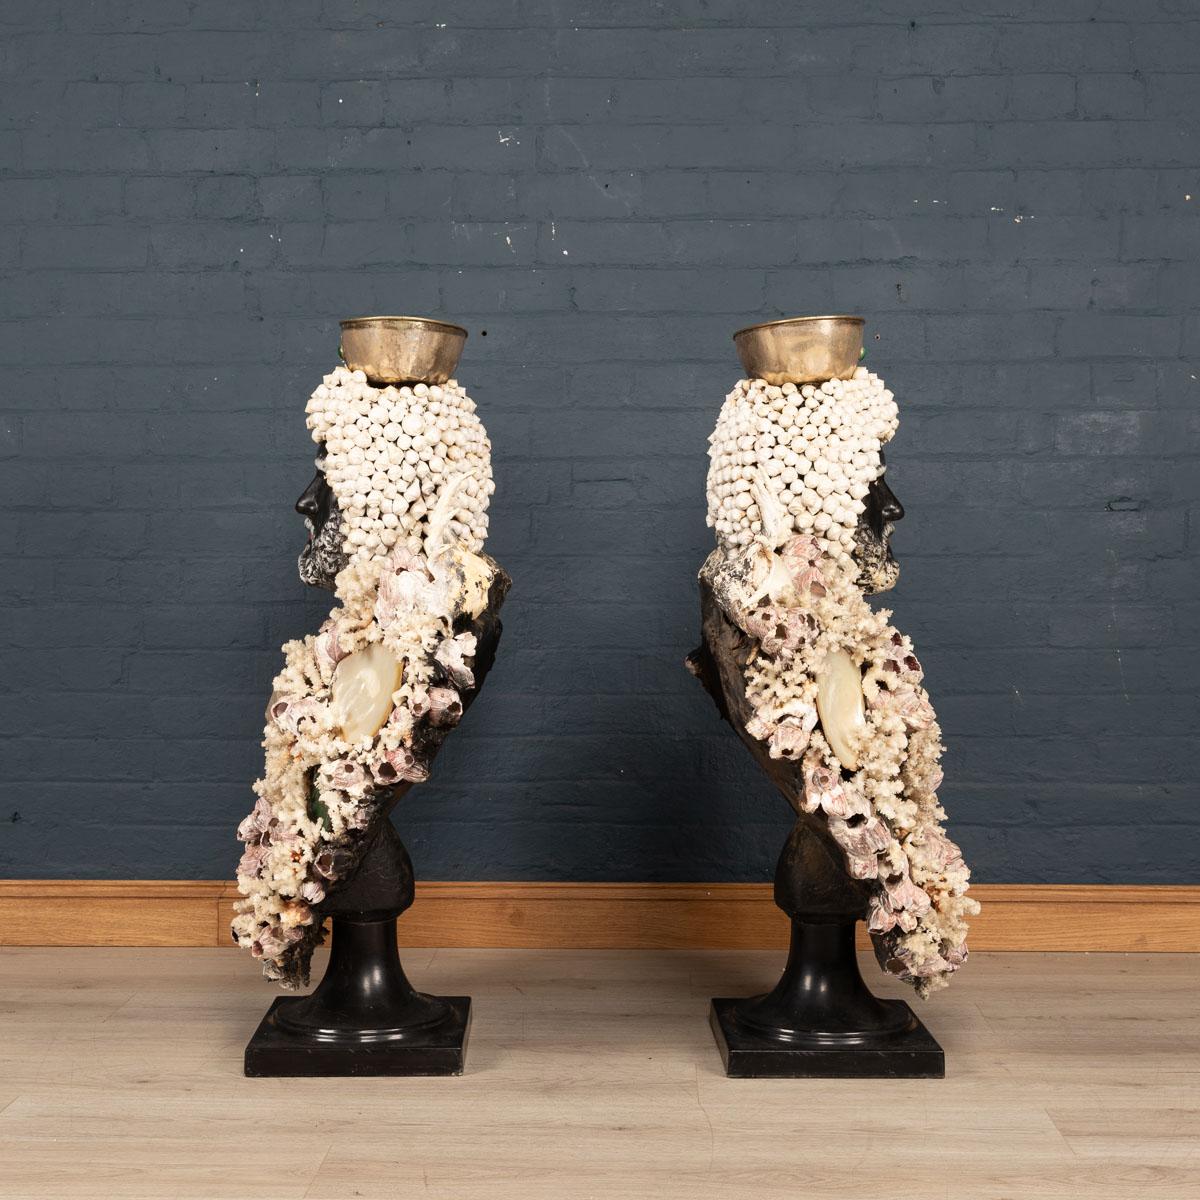 Anthony Redmile is a British Postwar and contemporary sculptor who was born in 1945 and established himself on the London interior design scene in the 1960s, producing eclectic and distinctive pieces for his clients. These busts are typical of his